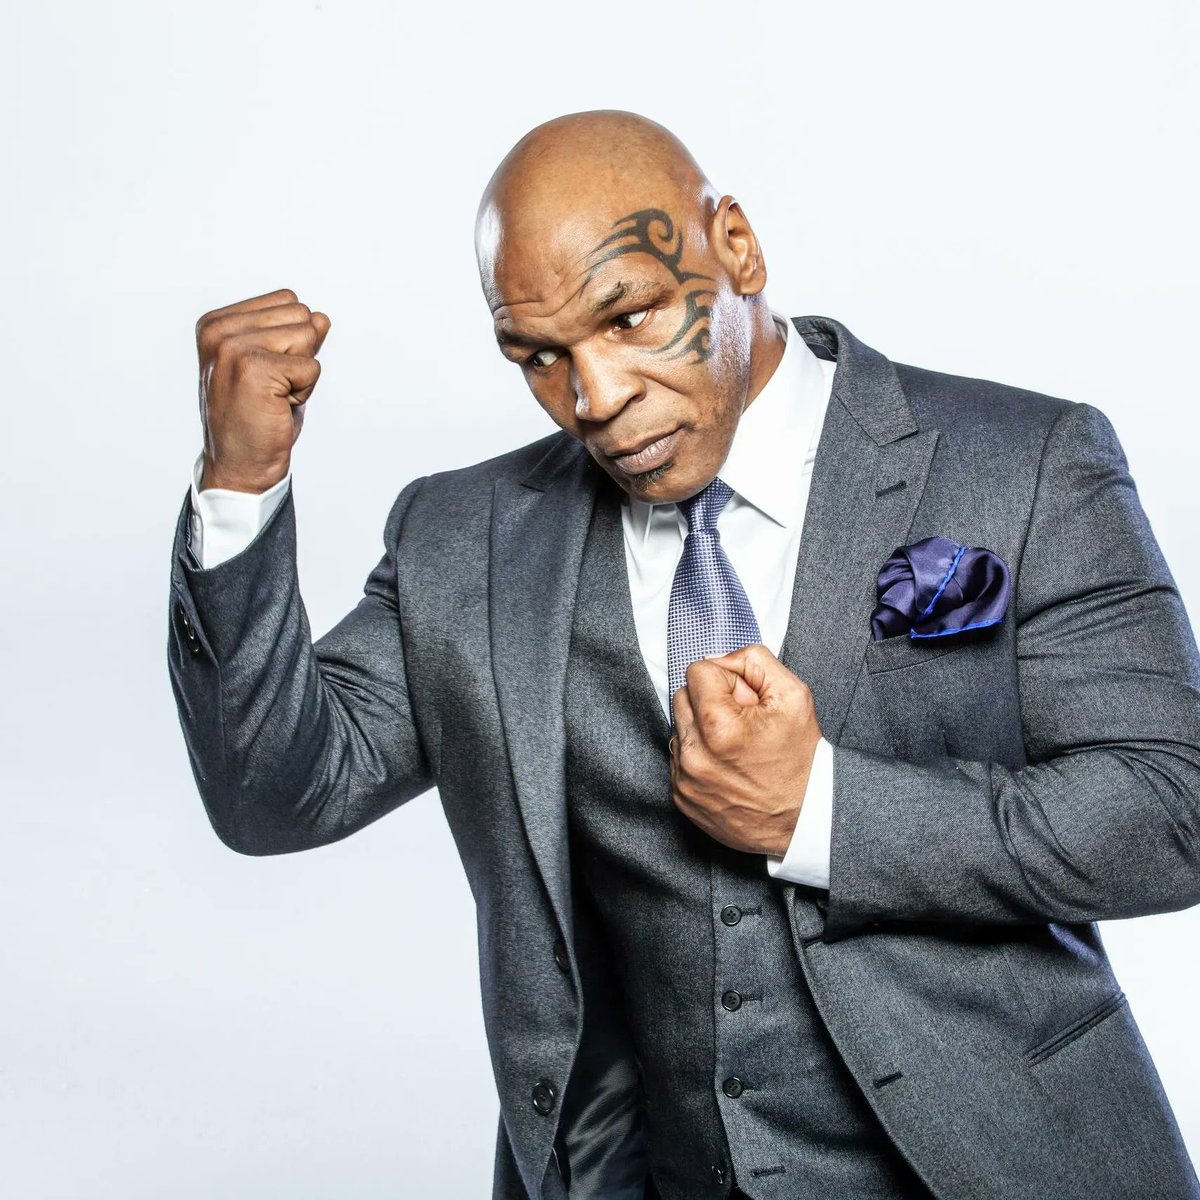 Mike Tyson, the former heavyweight champion, talks about his cannabis company @itstyson20 and the secret weapon that will help him smoke Jake Paul in their upcoming fight. @Forbes forbes.com/sites/willyako…